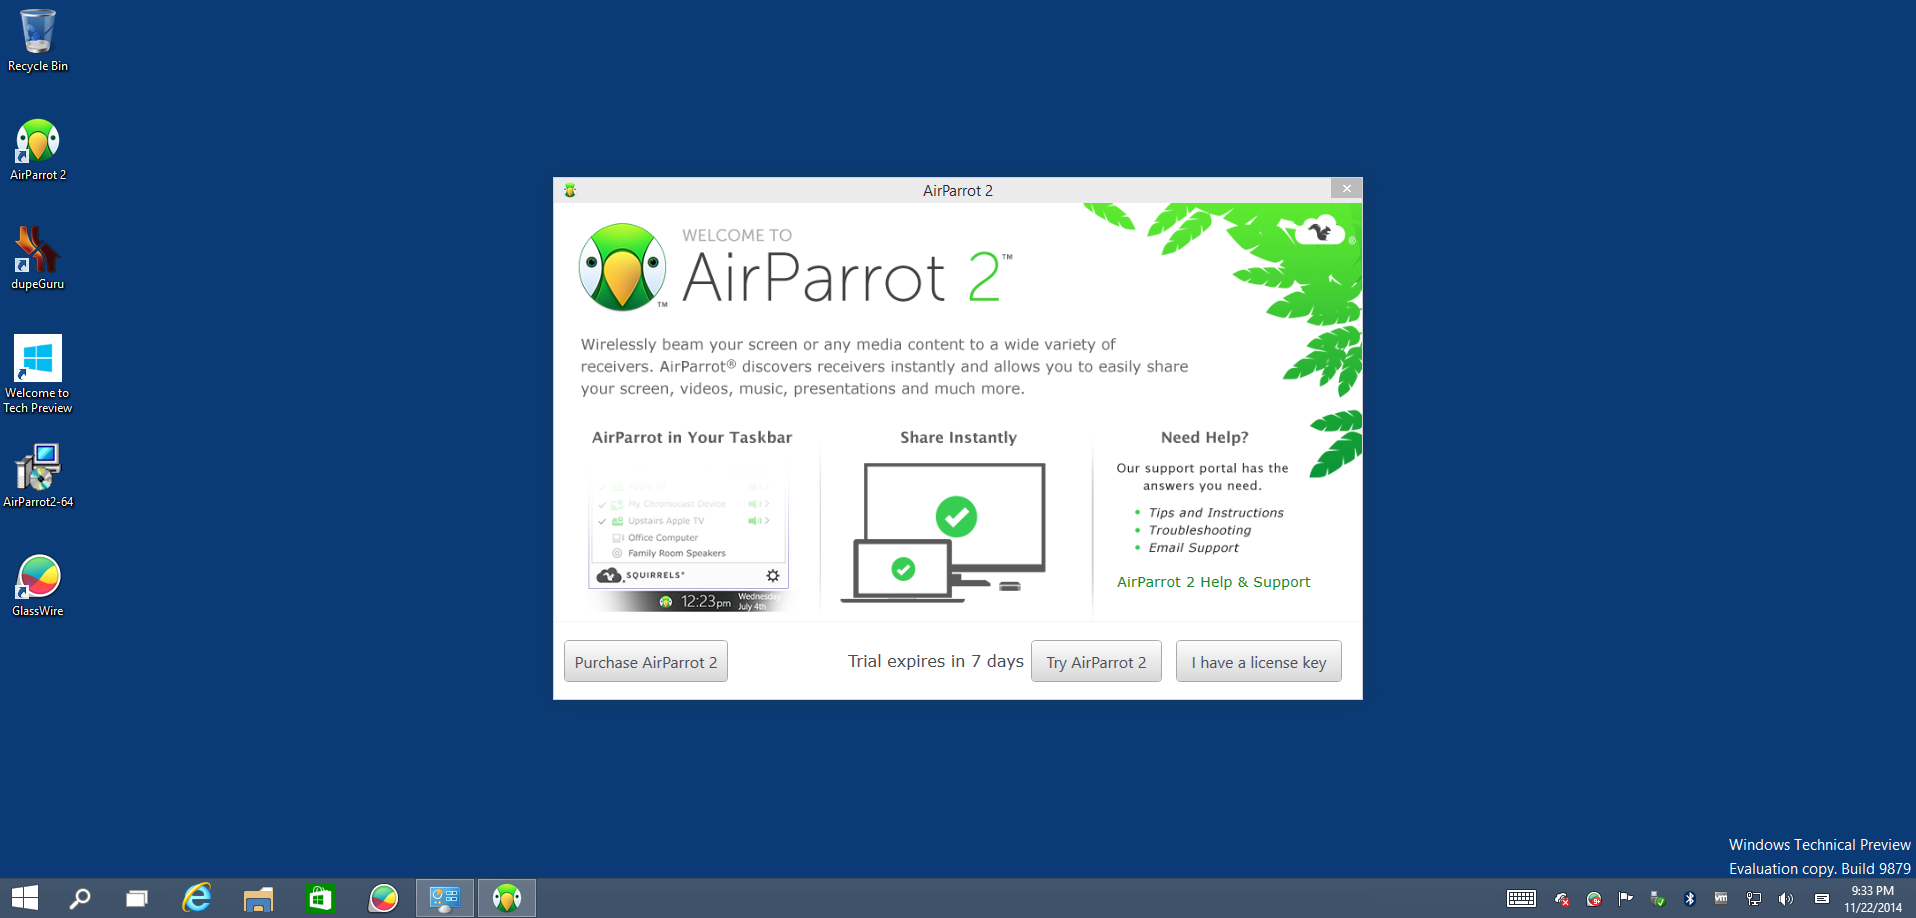 airparrot audio could not be connected